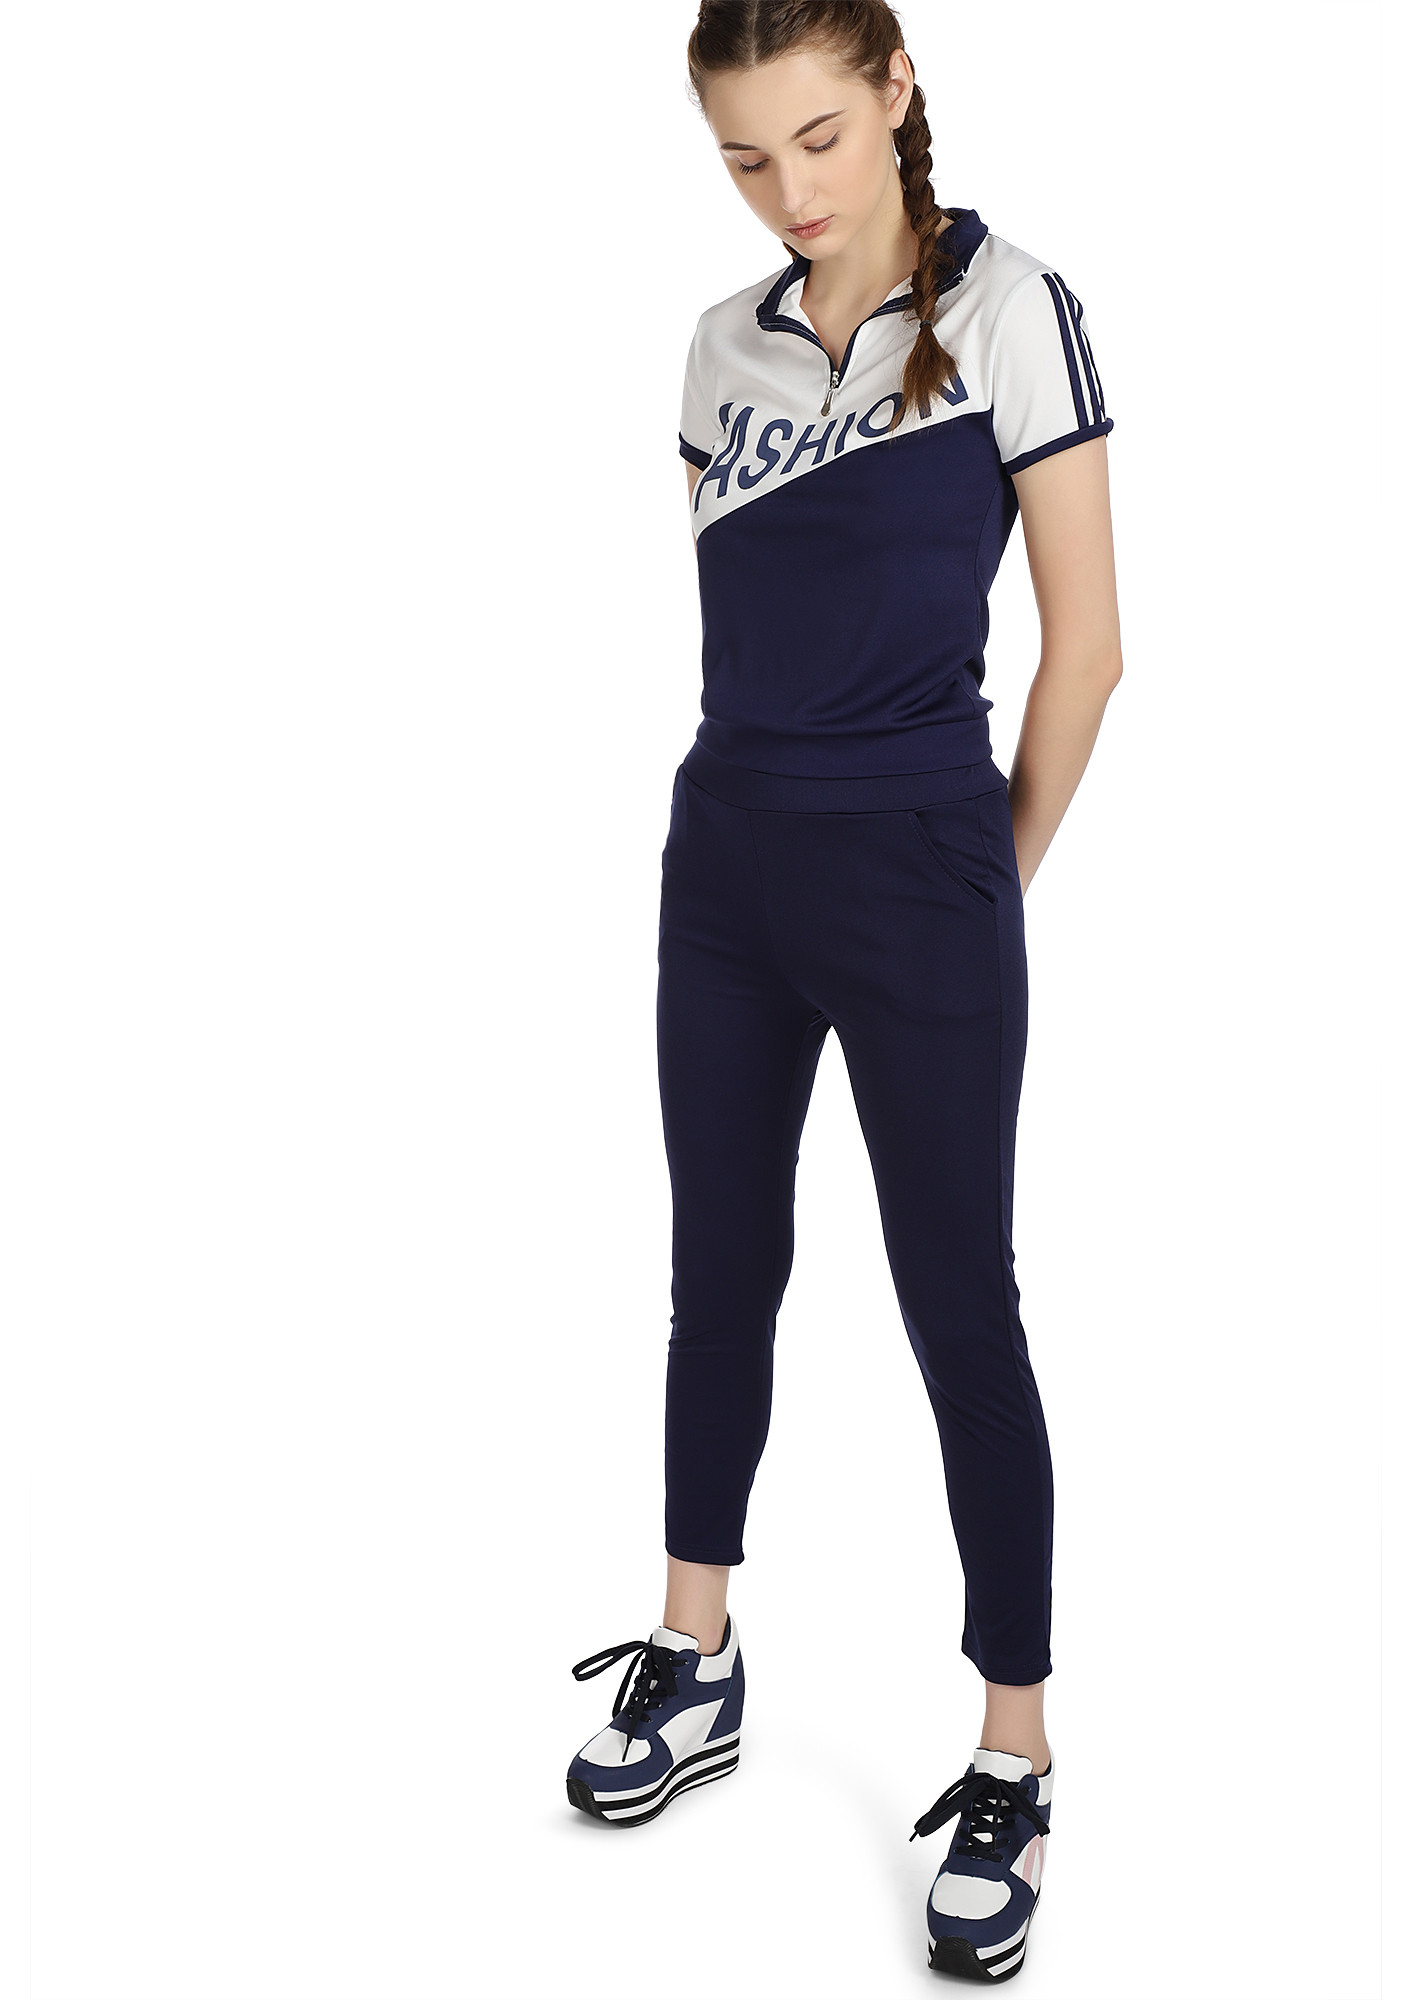 THE FITNESS OUTFIT WHITE NAVY TRACKSUIT